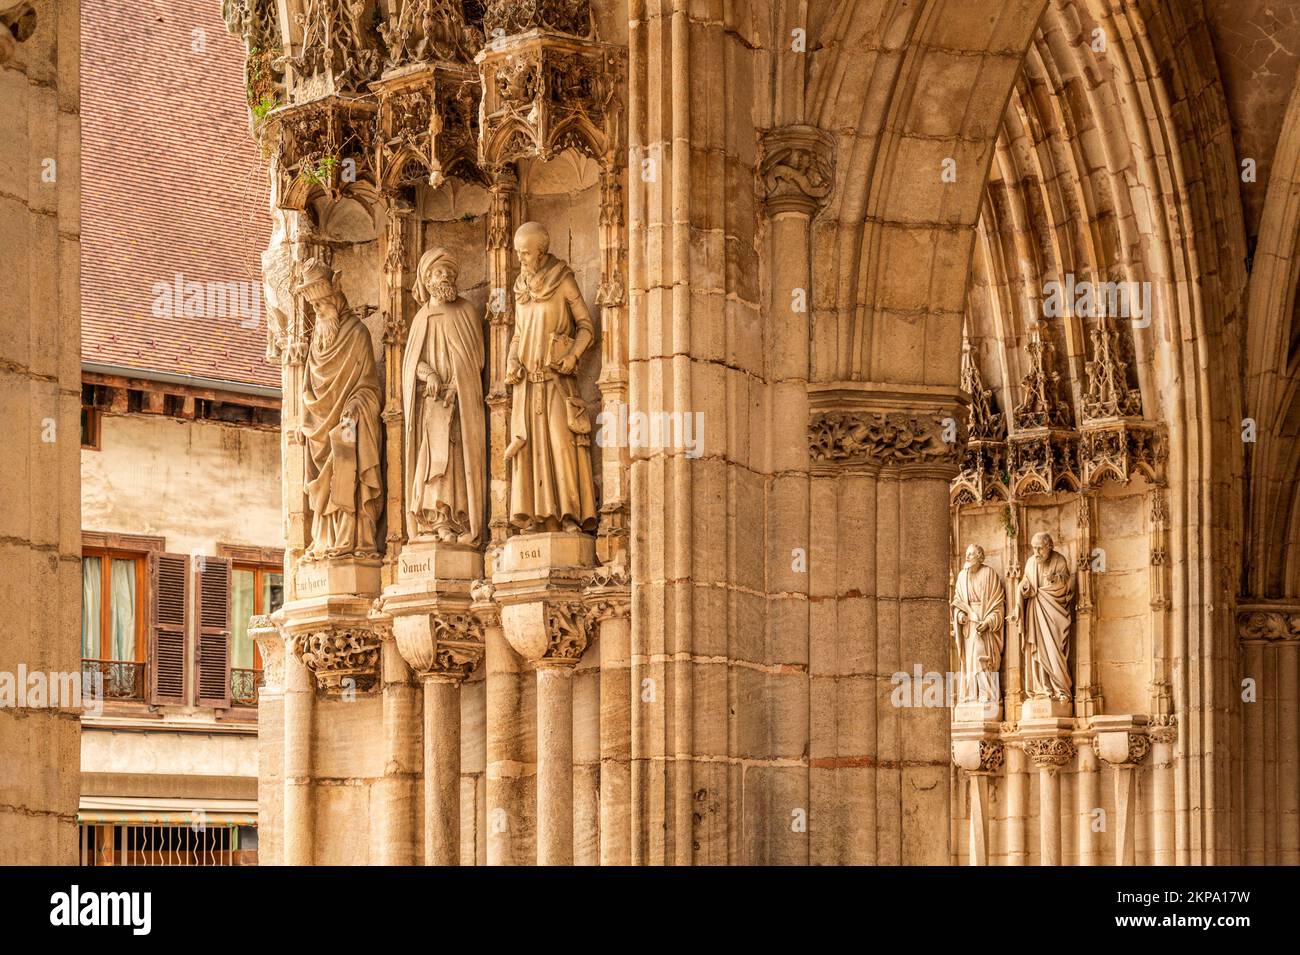 The stone carvings of the cathedral of Auxonne, France Stock Photo